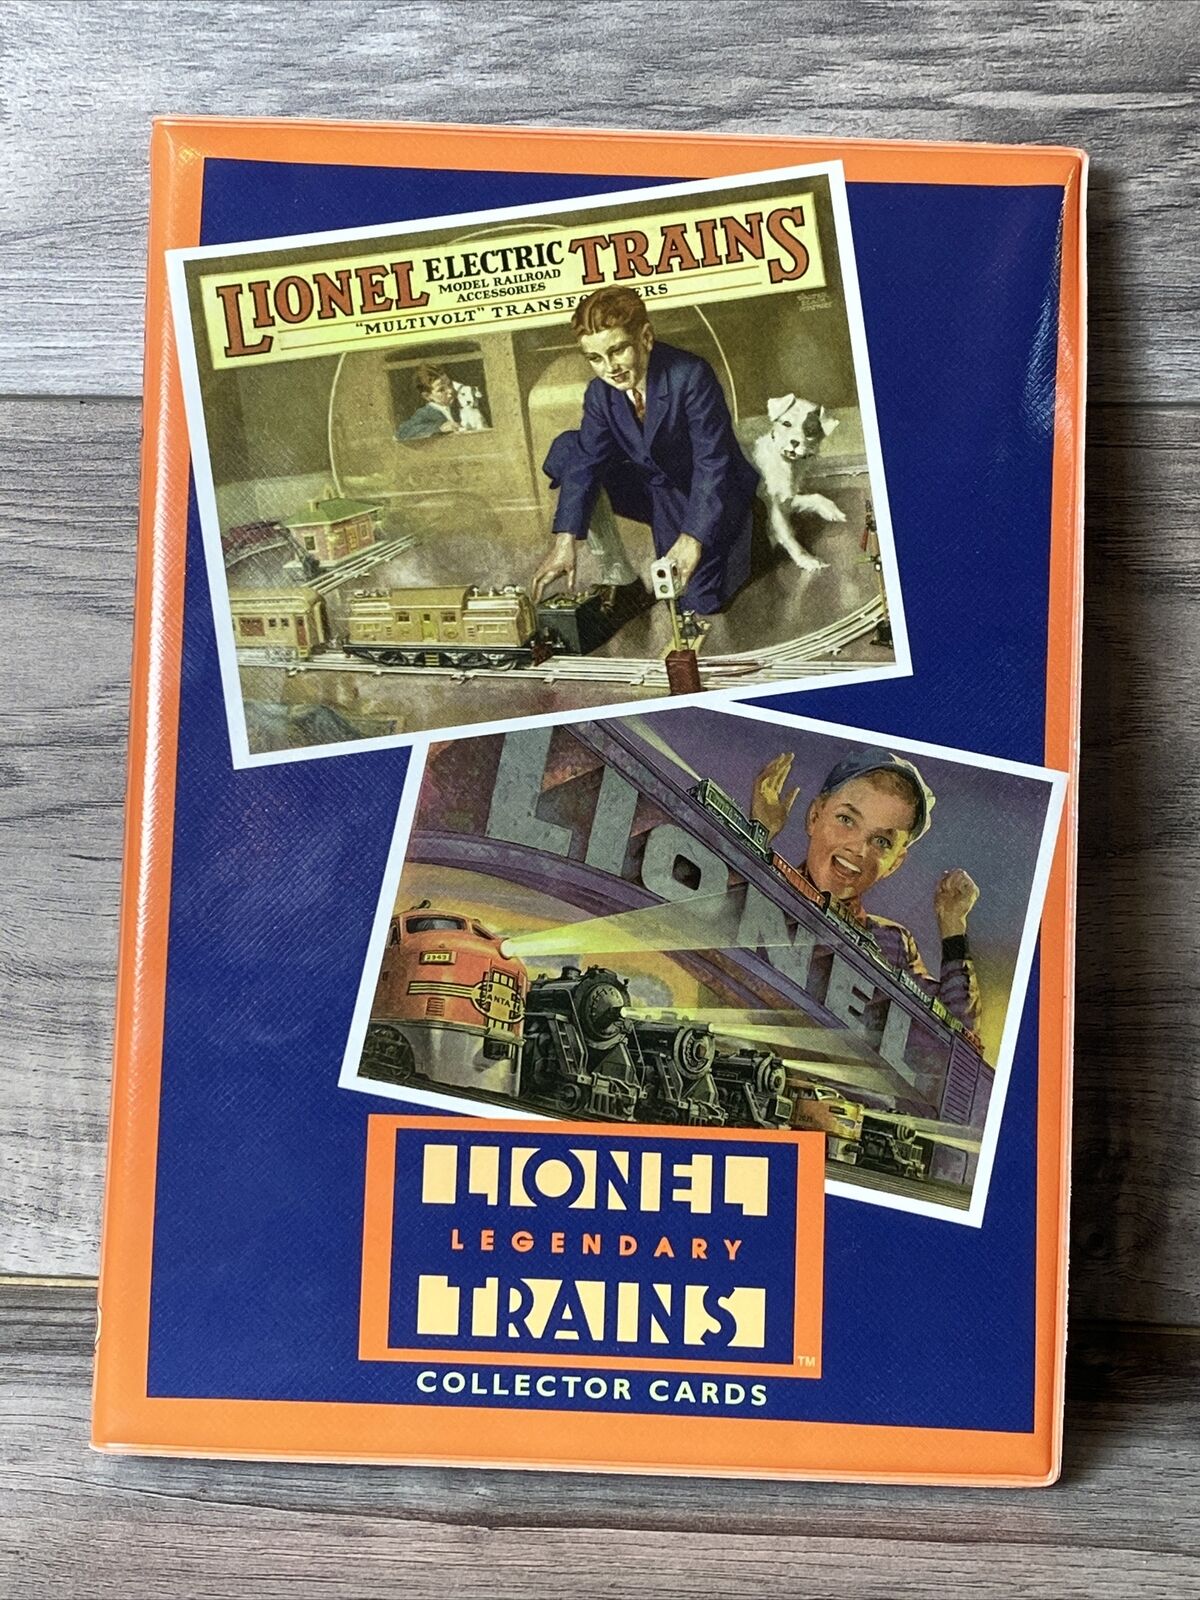 1997 LIONEL LEGENDARY TRAINS COLLECTOR ALBUM Holds 72 cards New.